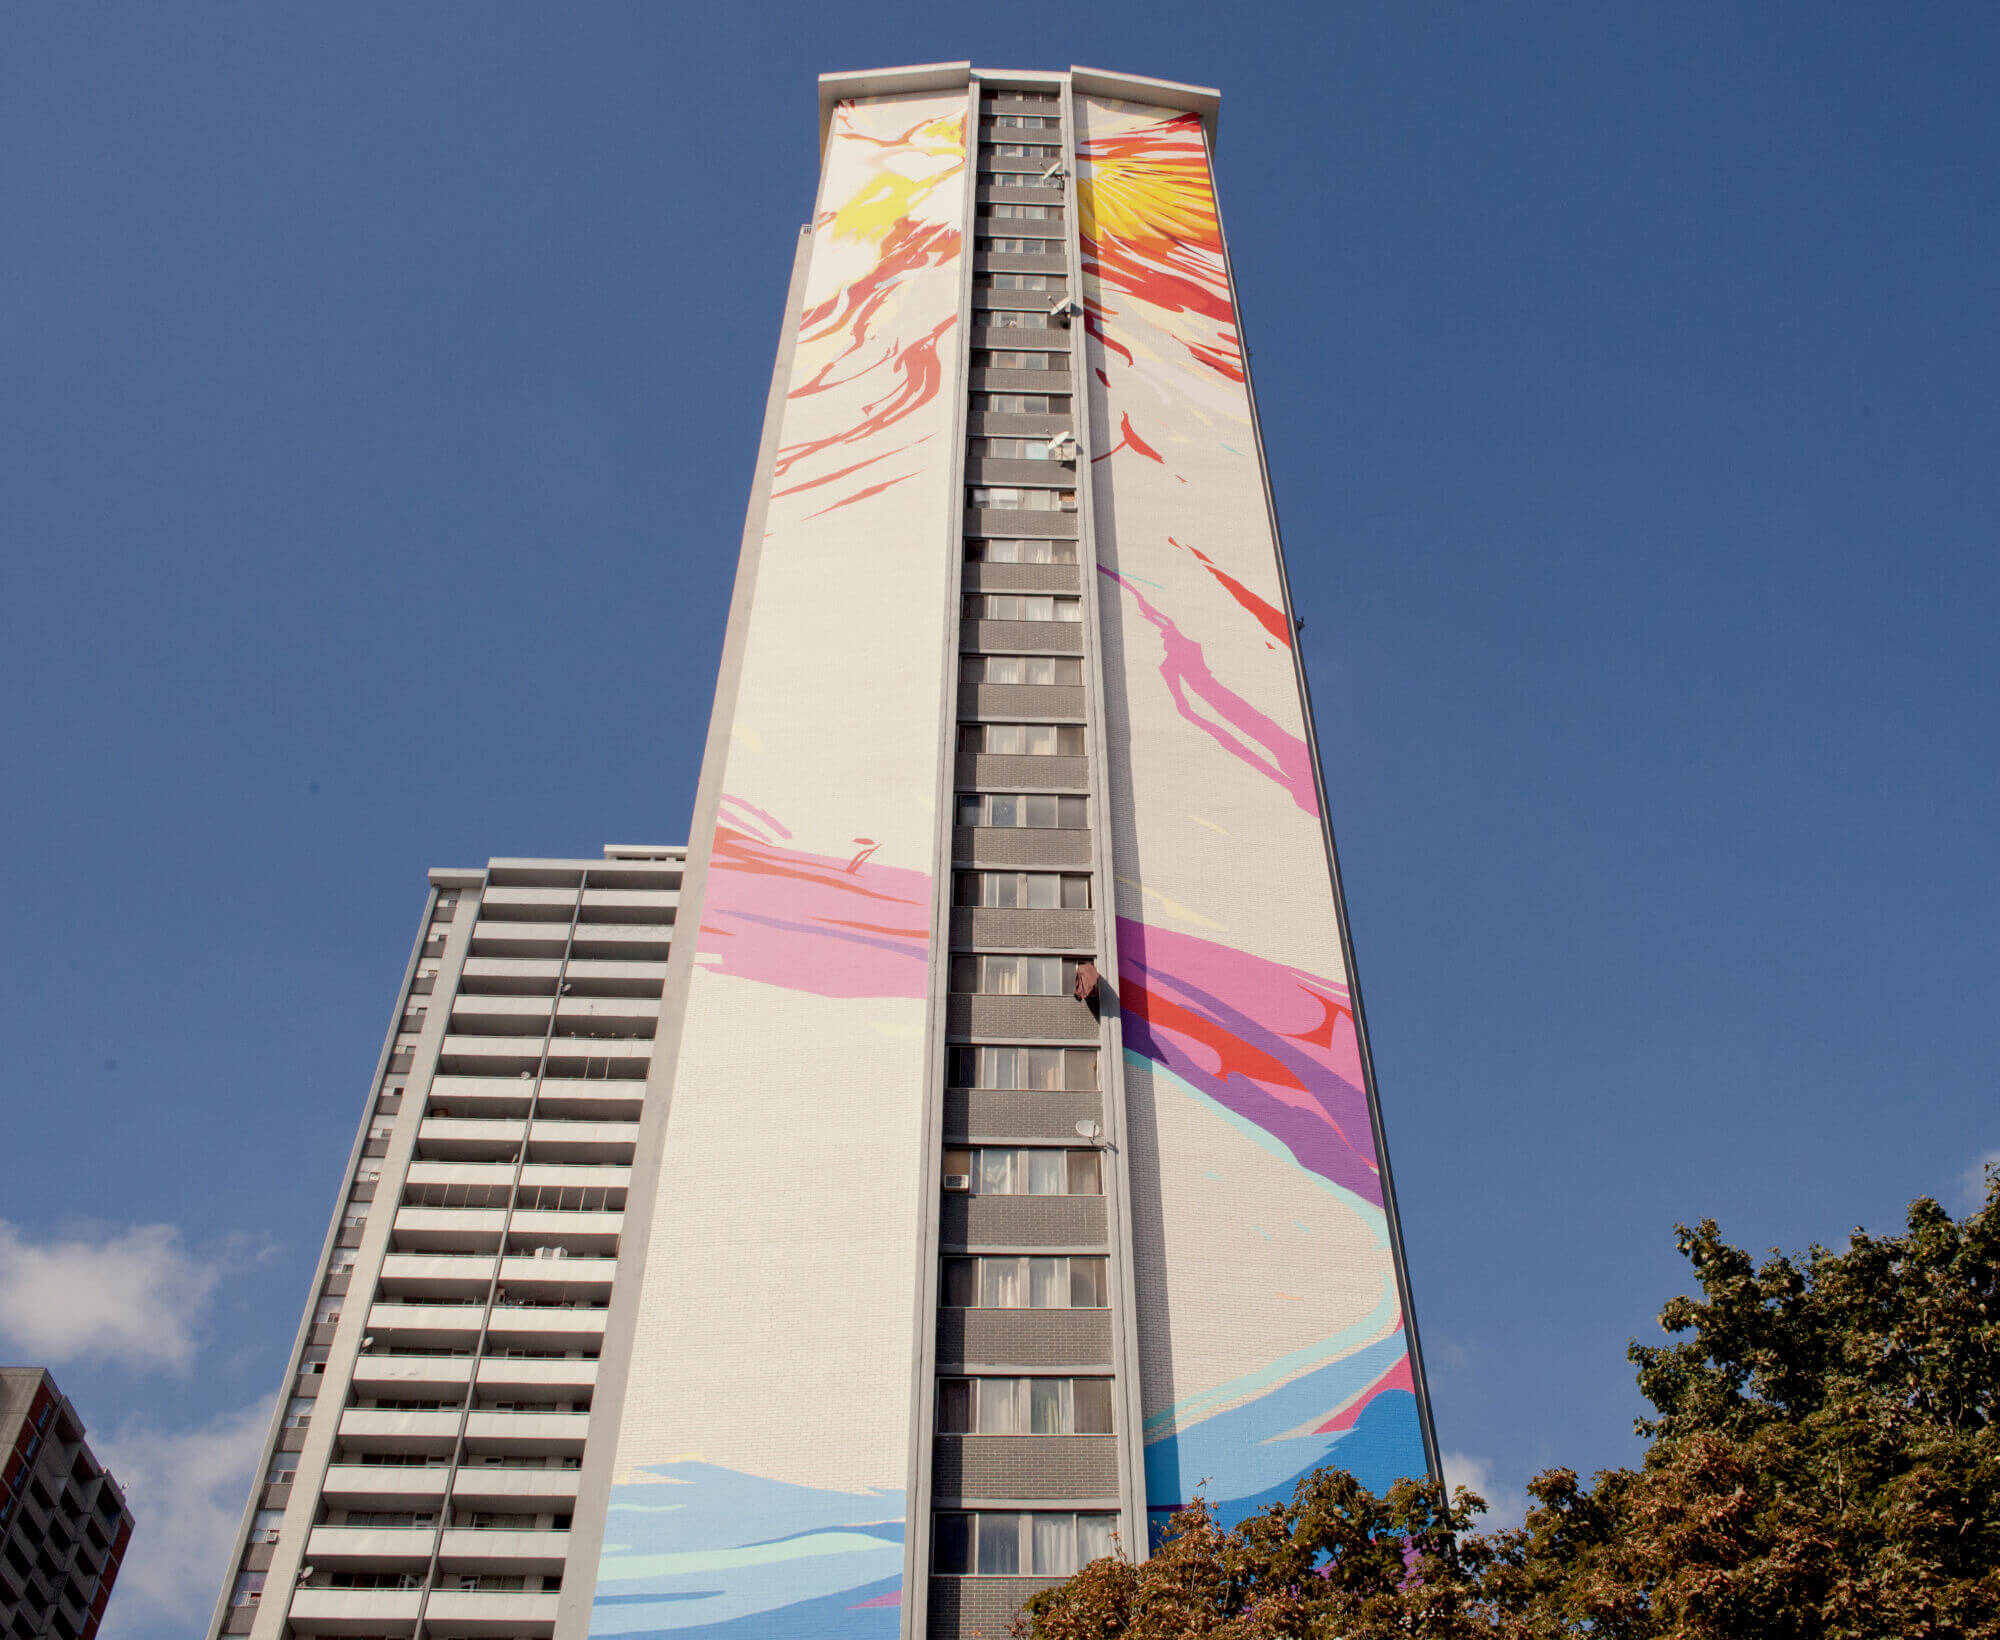 An exterior of a high-rise building with a colourful mural painting on its side.